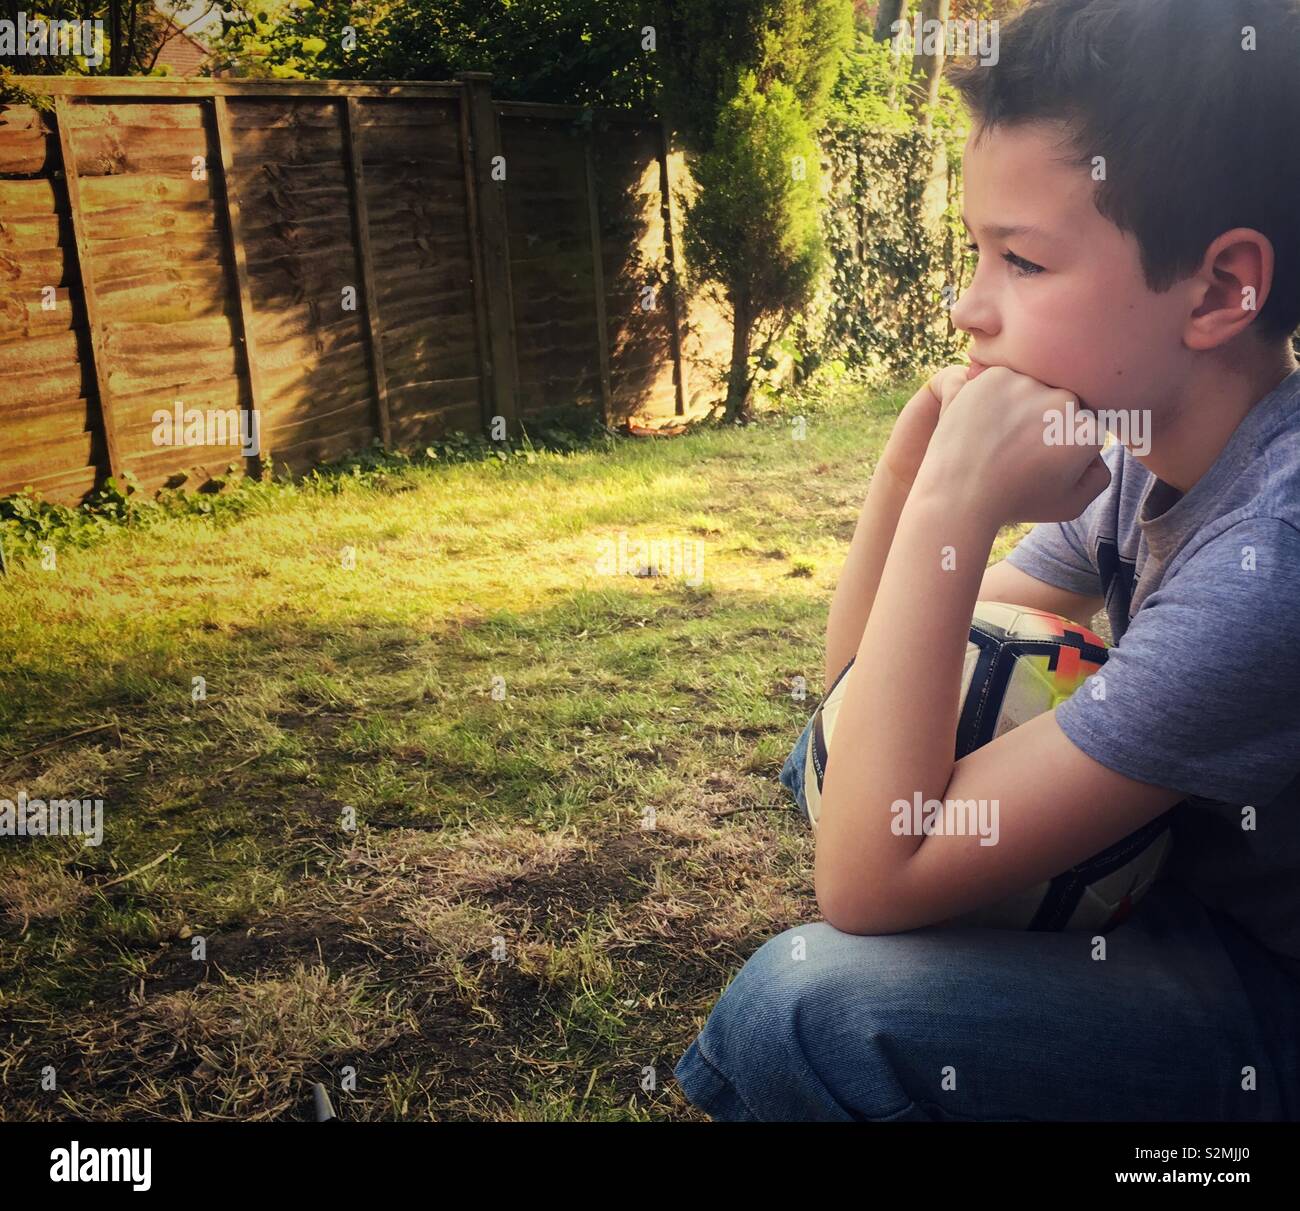 A nine-year-old boy sits deep in thought, resting his chin on his hands, while holding a football on his knee. Stock Photo